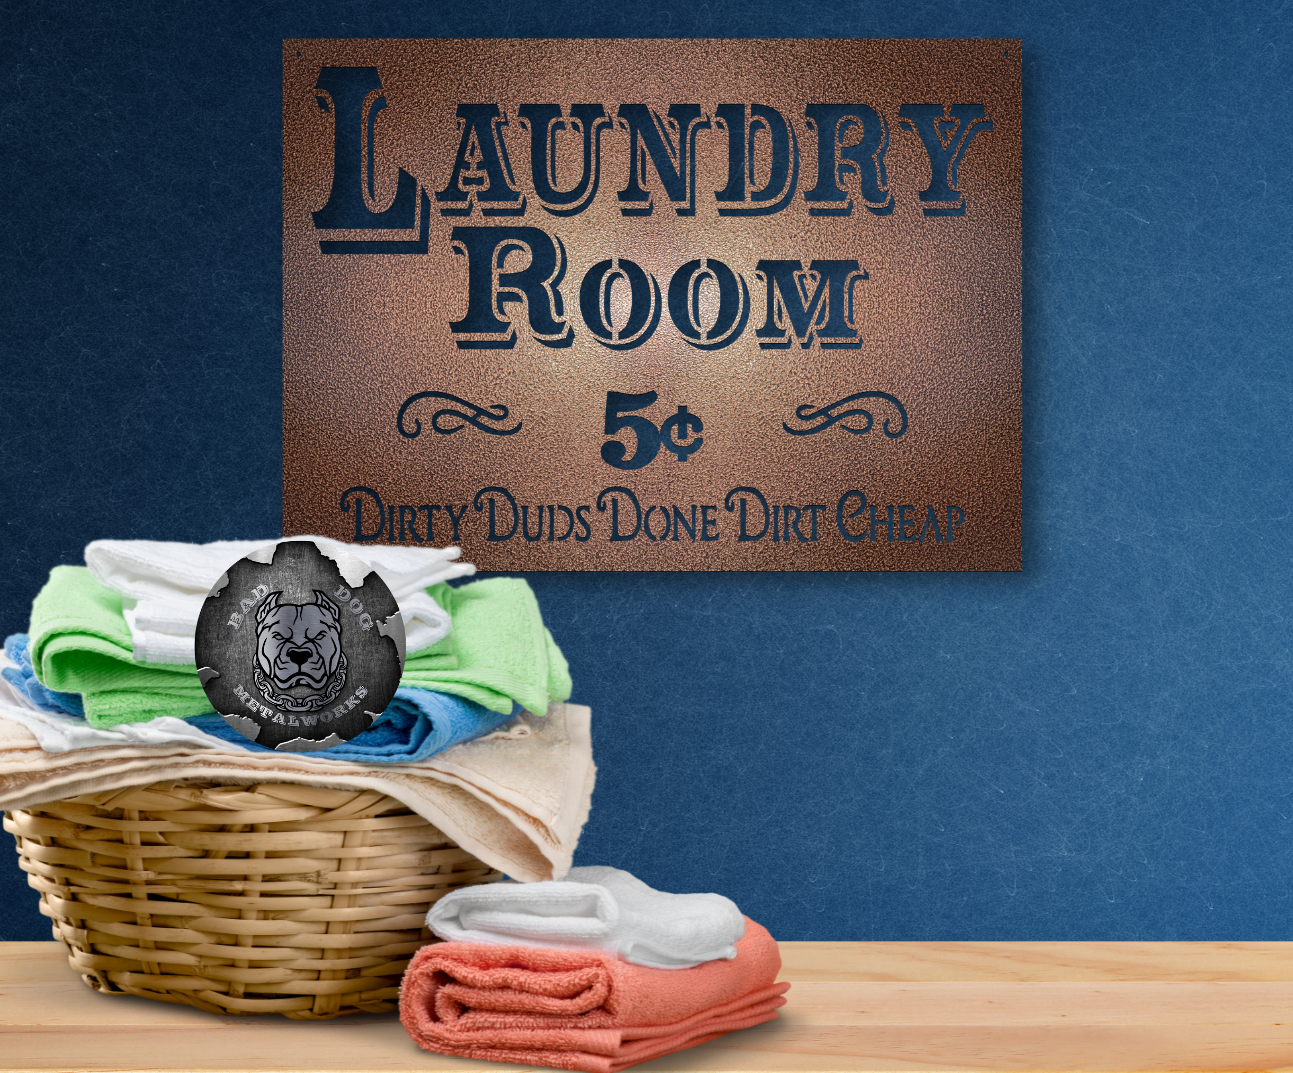 vintage laundry room signs